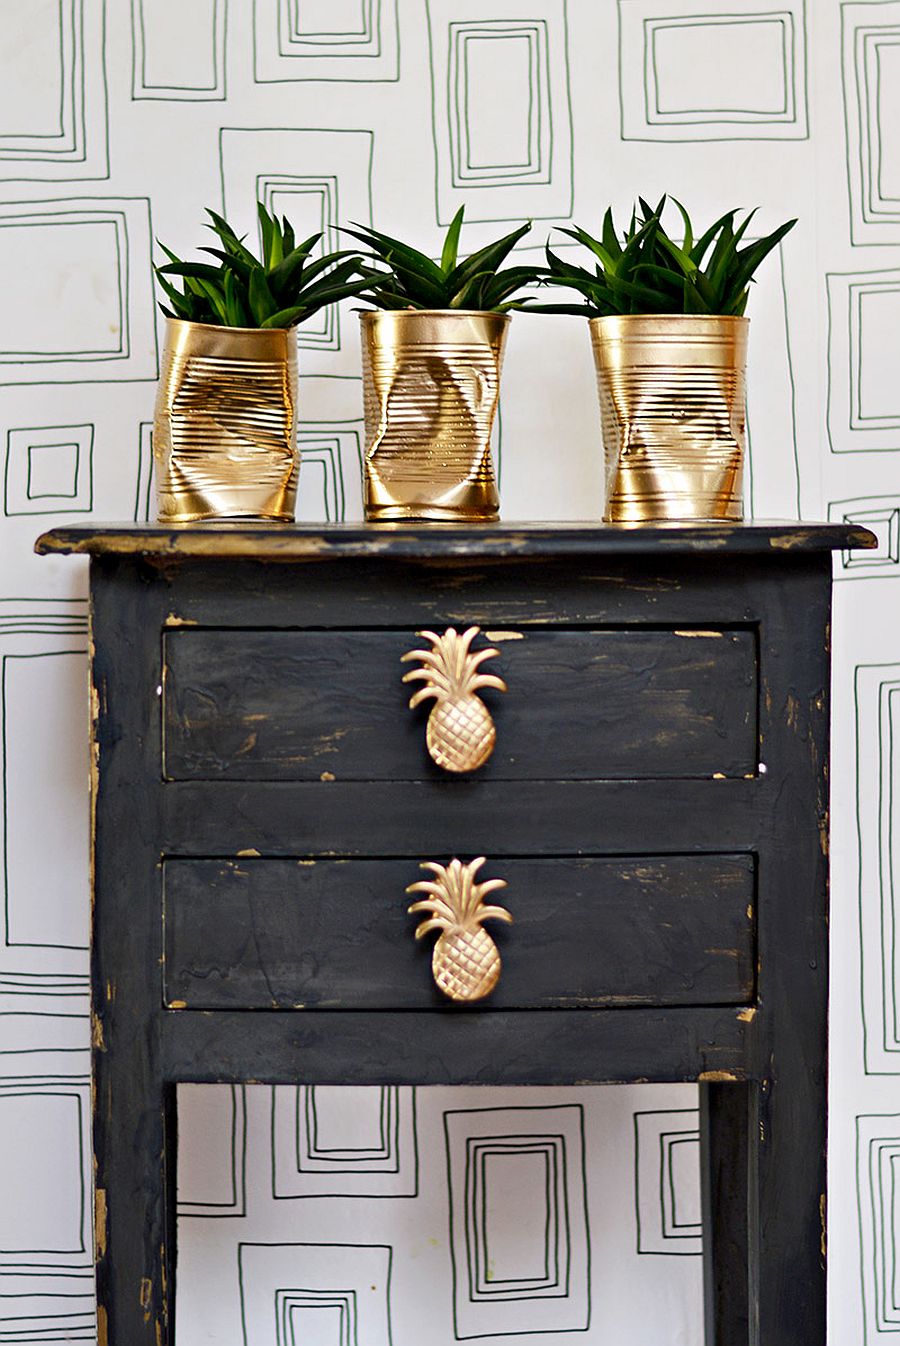 Crushed Tin Can DIY Planter in gold takes just 10 minutes to craft!